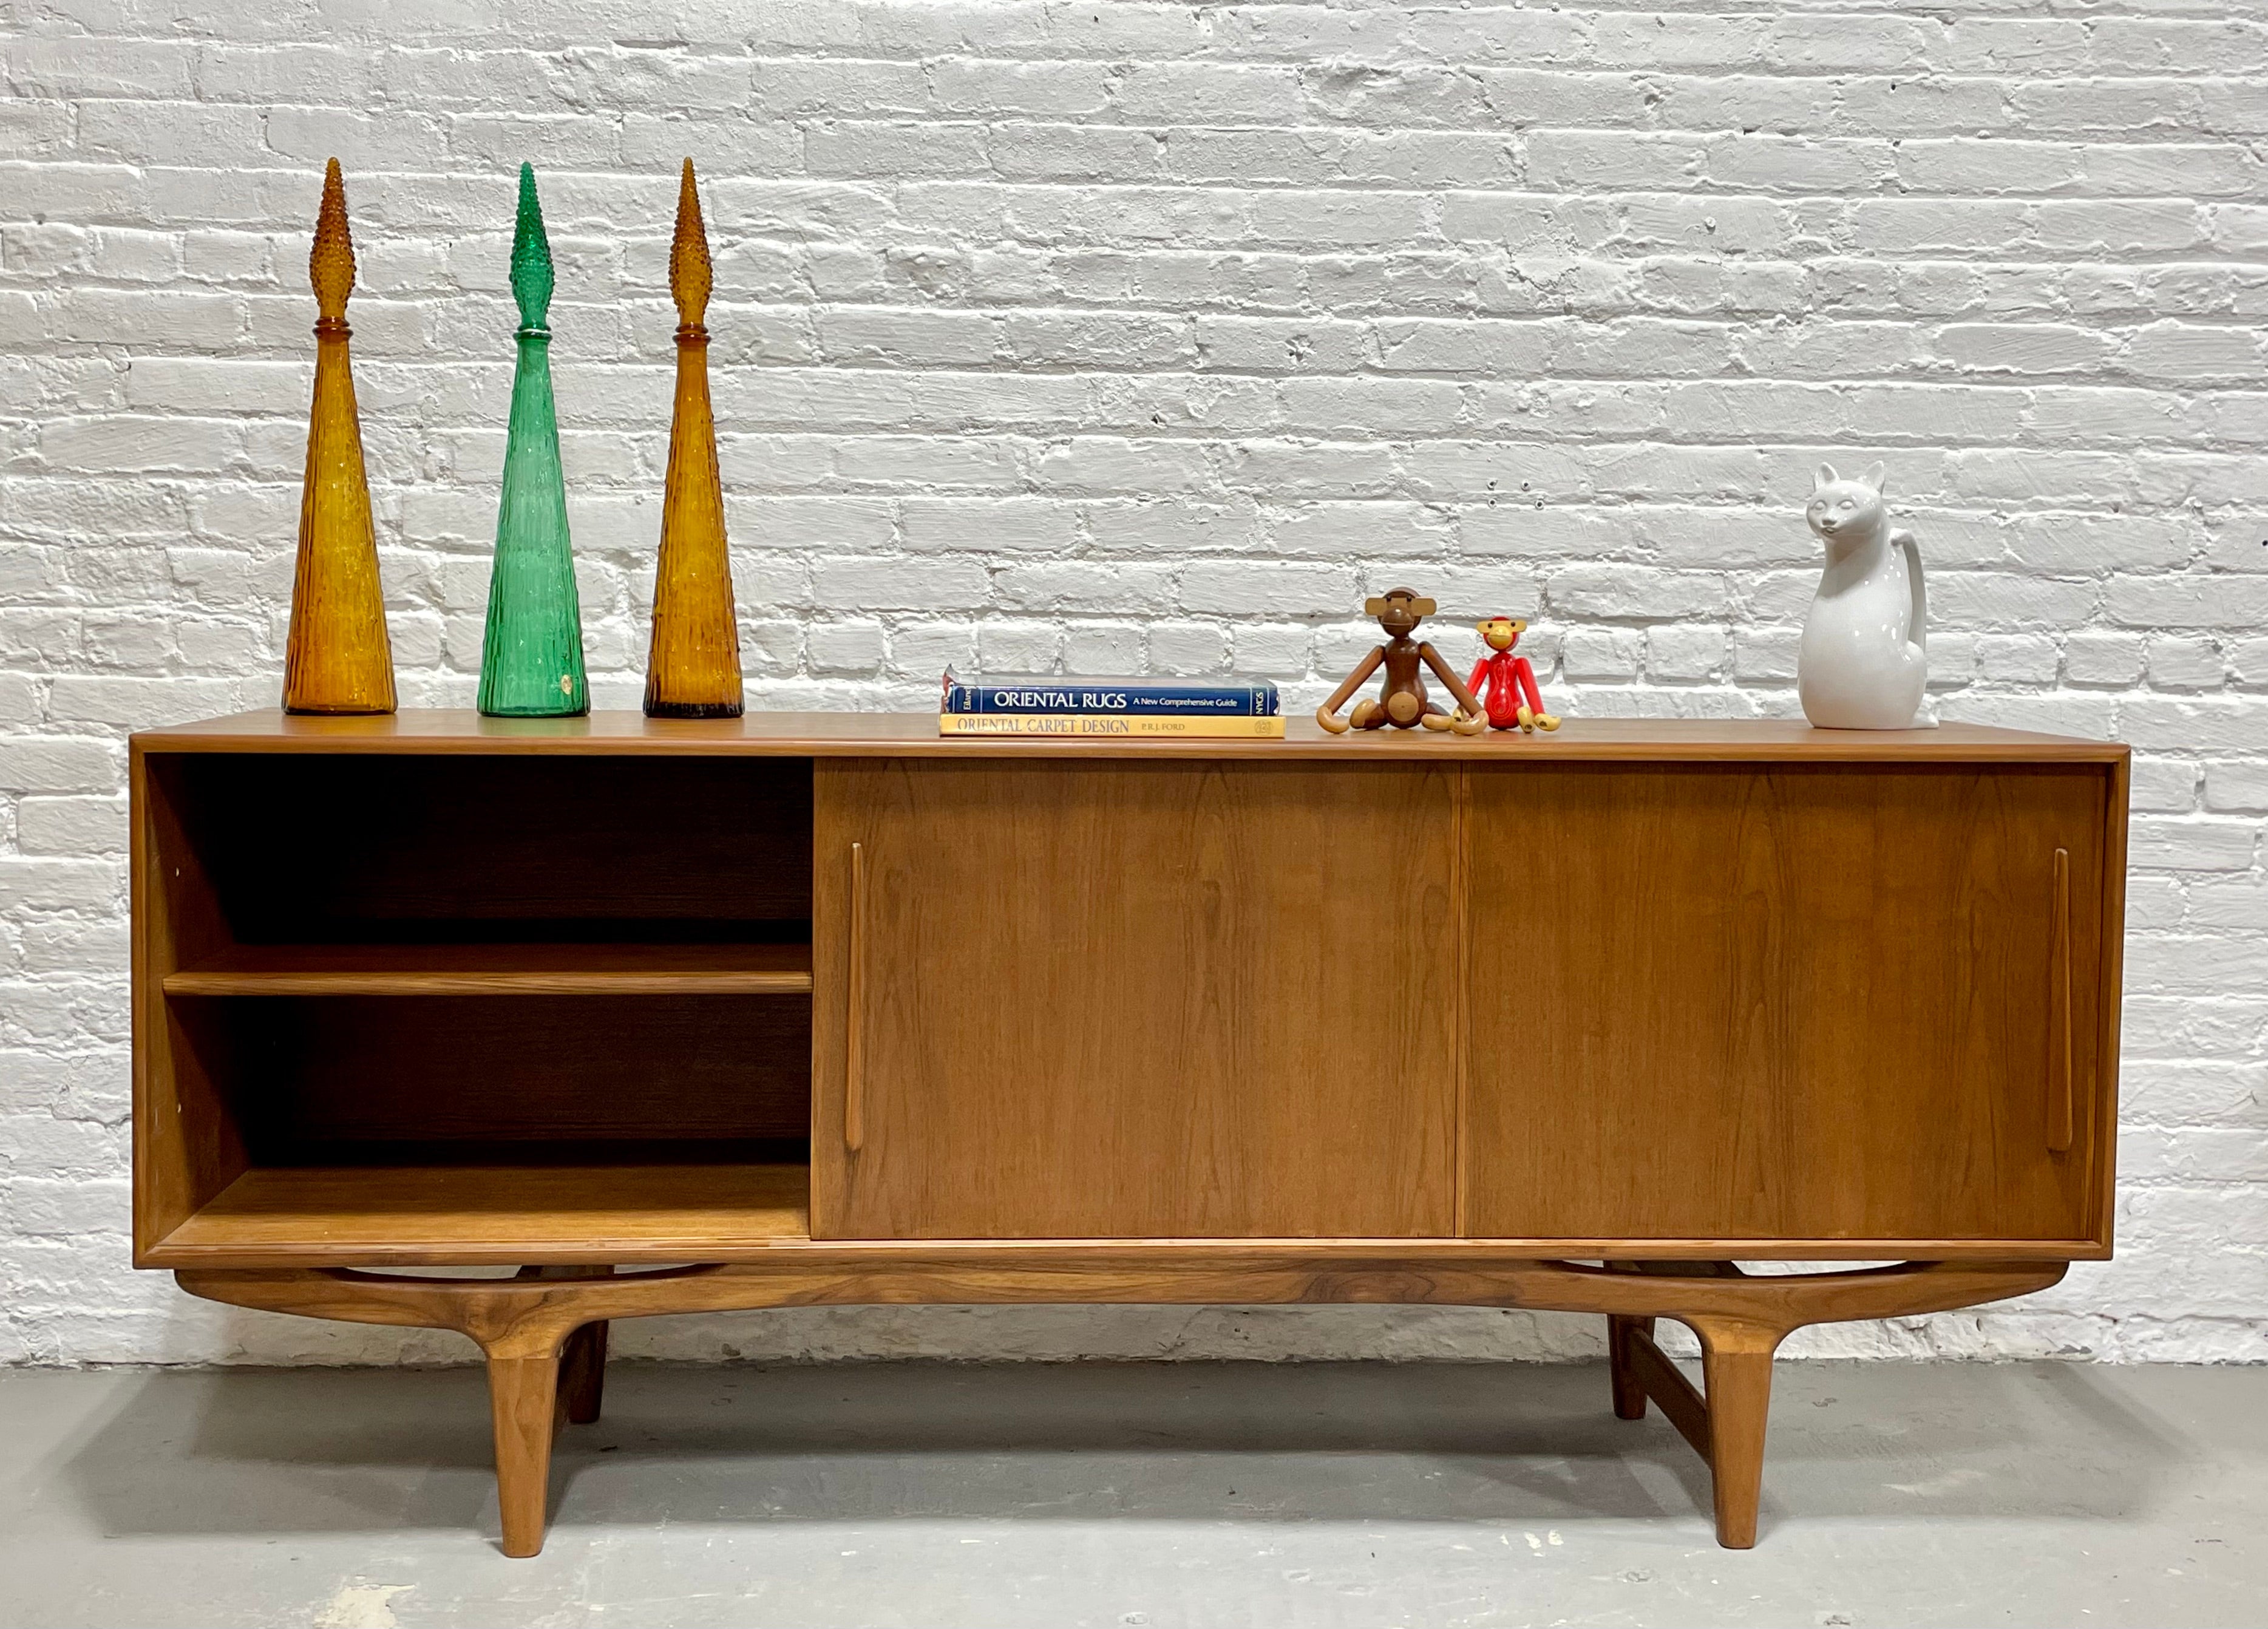 LONG & SCULPTED Mid Century Modern styled Danish CREDENZA / media stand / Sideboard